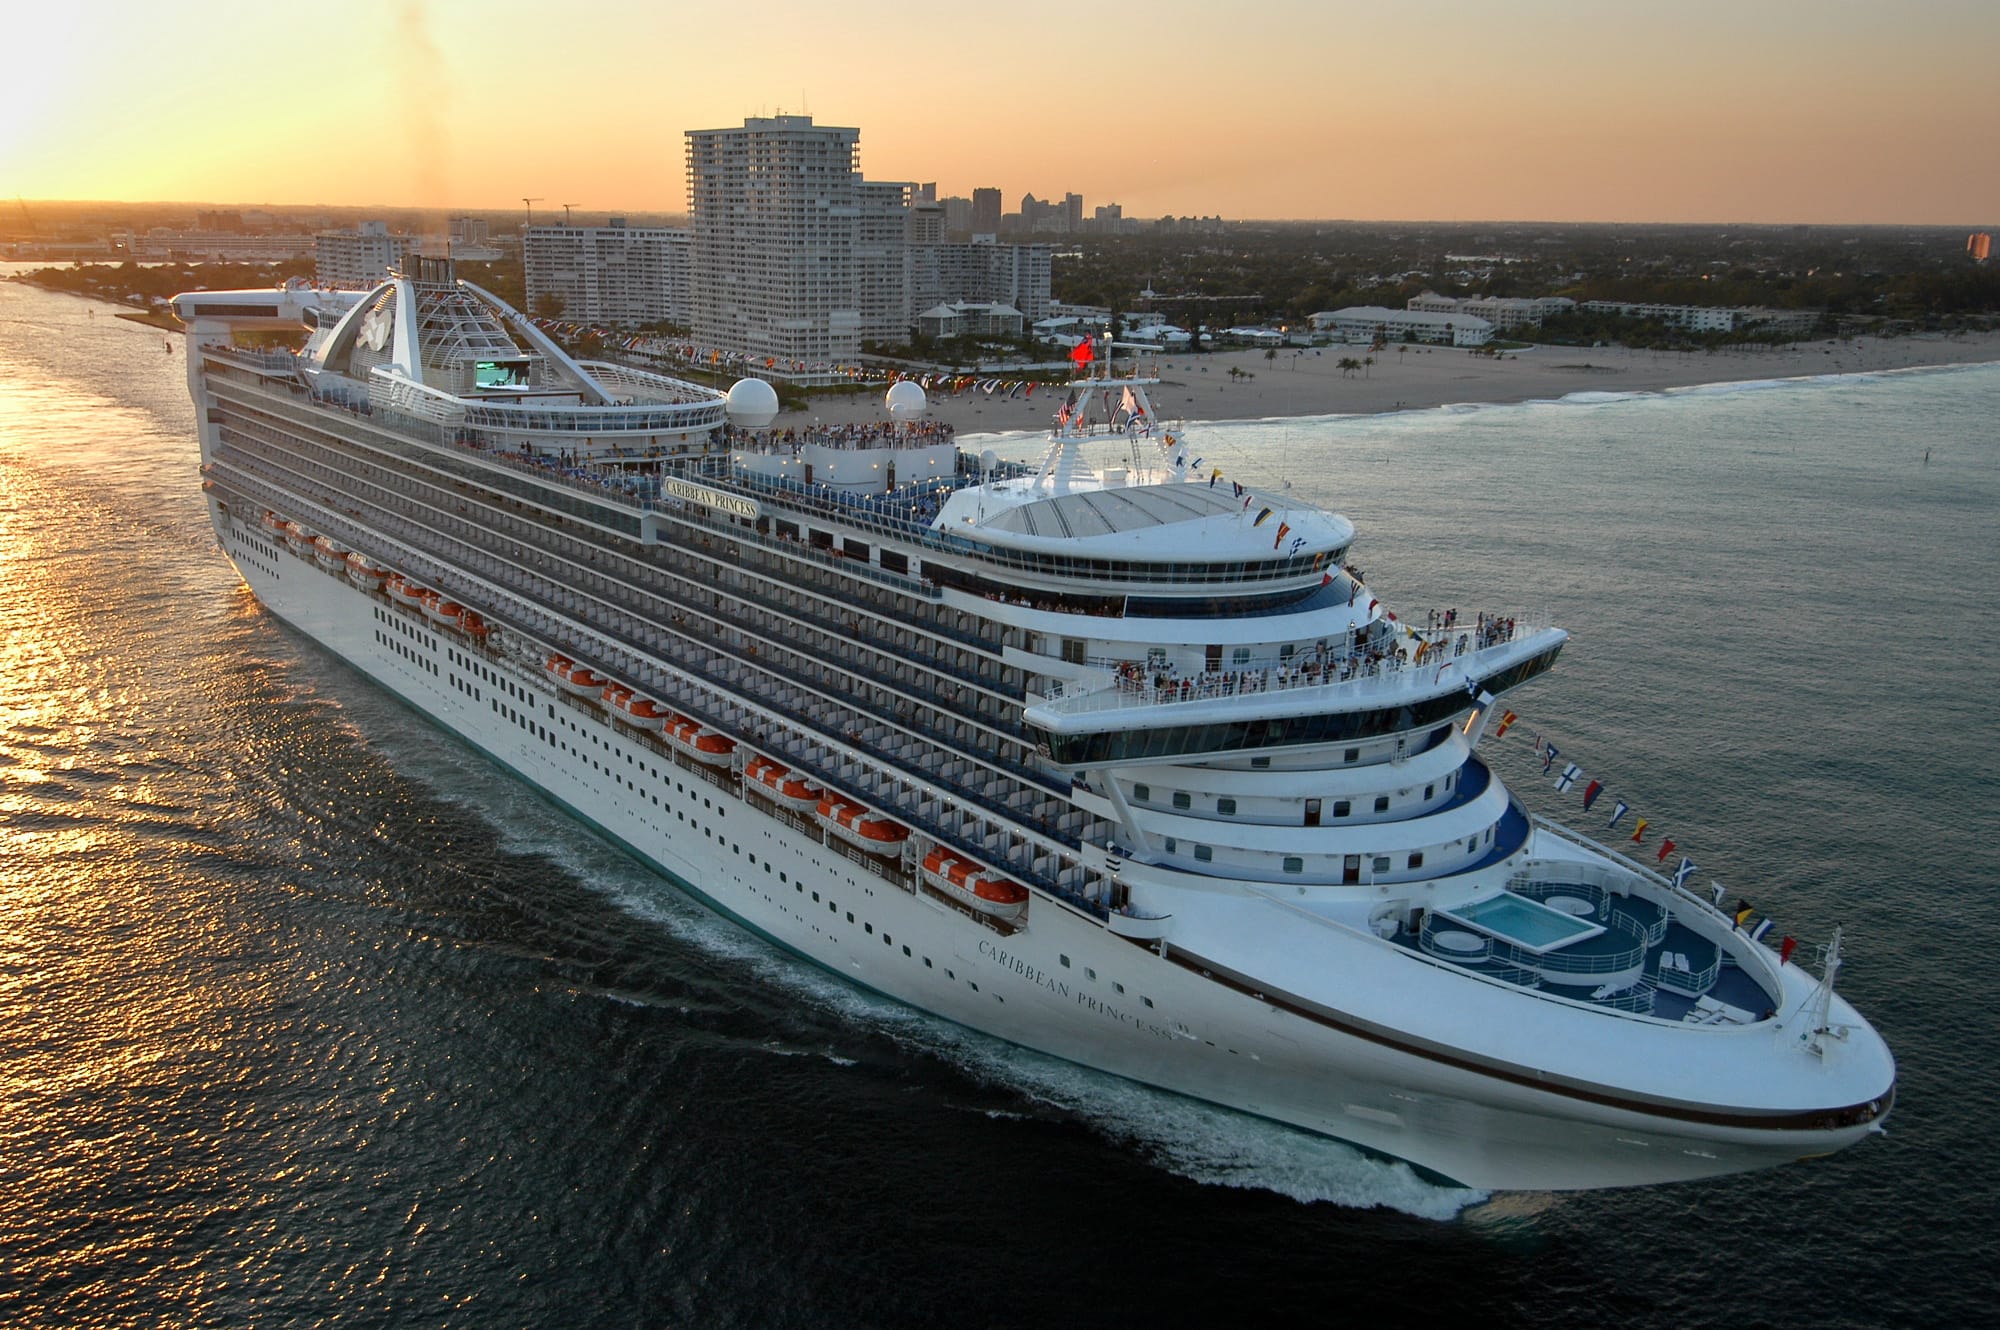 The new Caribbean Princess departs on its maiden voyage from Port Everglades in Fort Lauderdale, Fla., in April 2004.